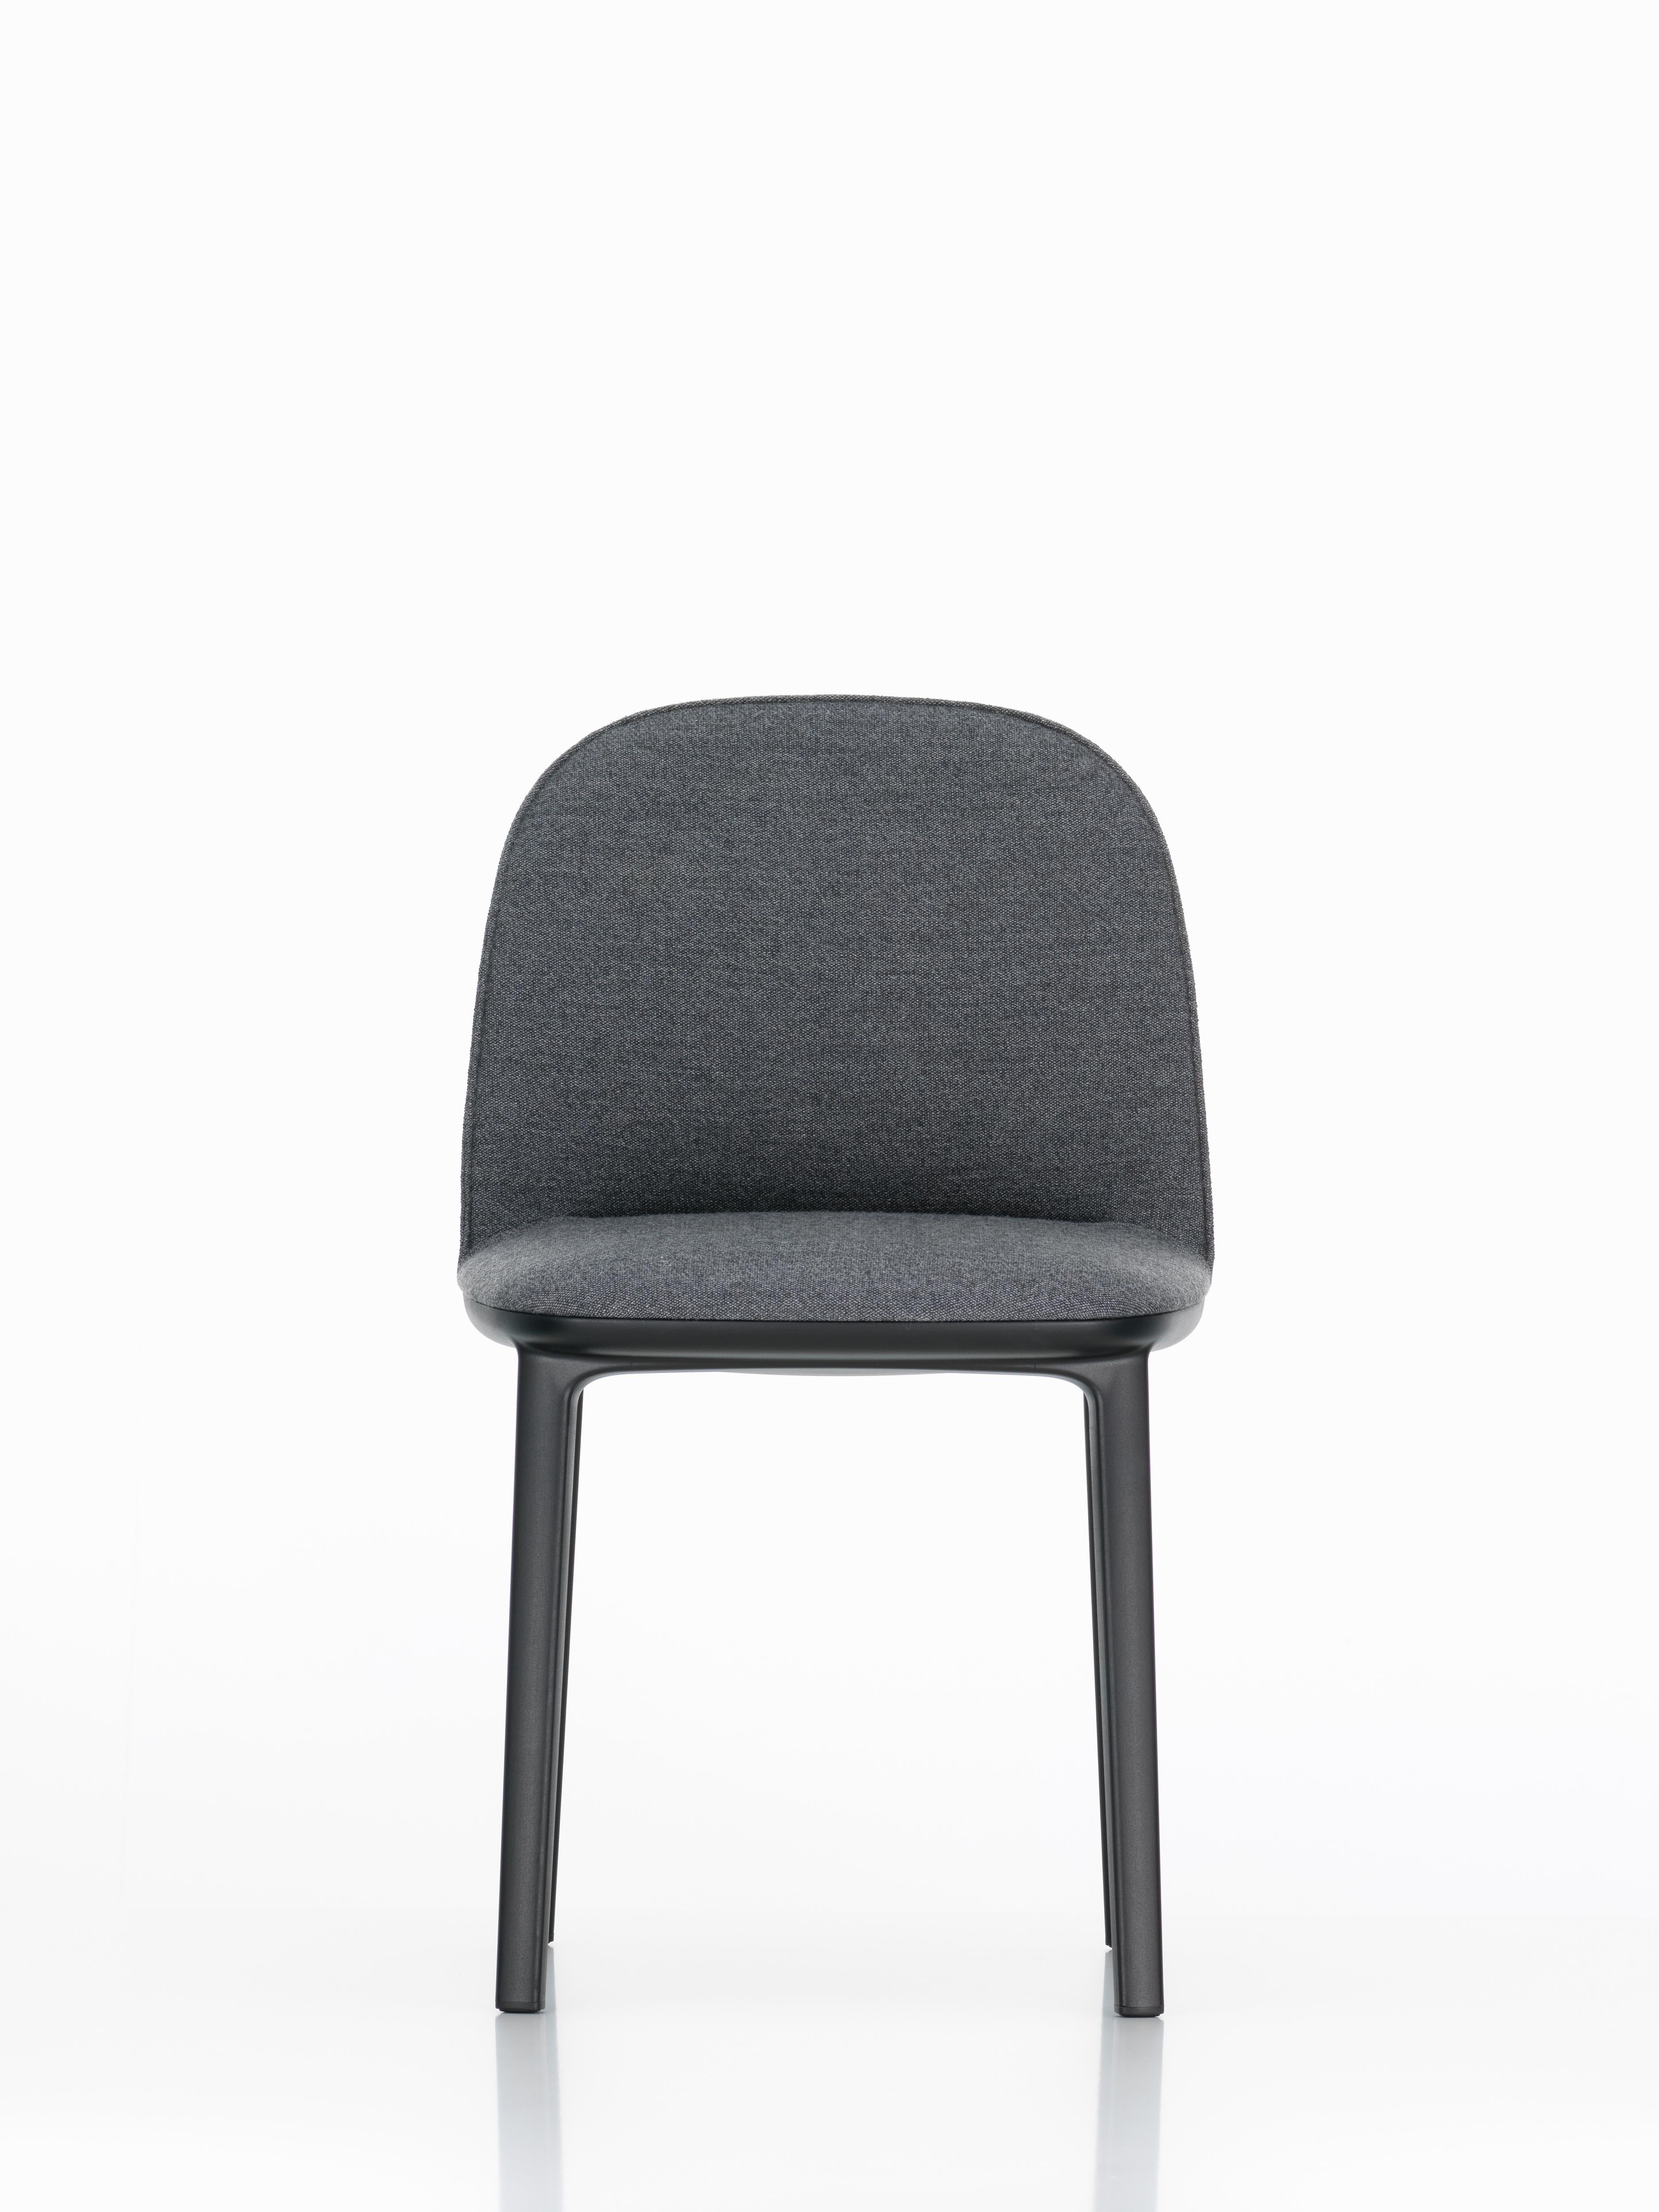 These products are only available in the United States.

The seat construction of the soft shell chair ensures a level of comfort that is first revealed upon use: vertical ribs concealed in the back shell adapt to the user, providing freedom of